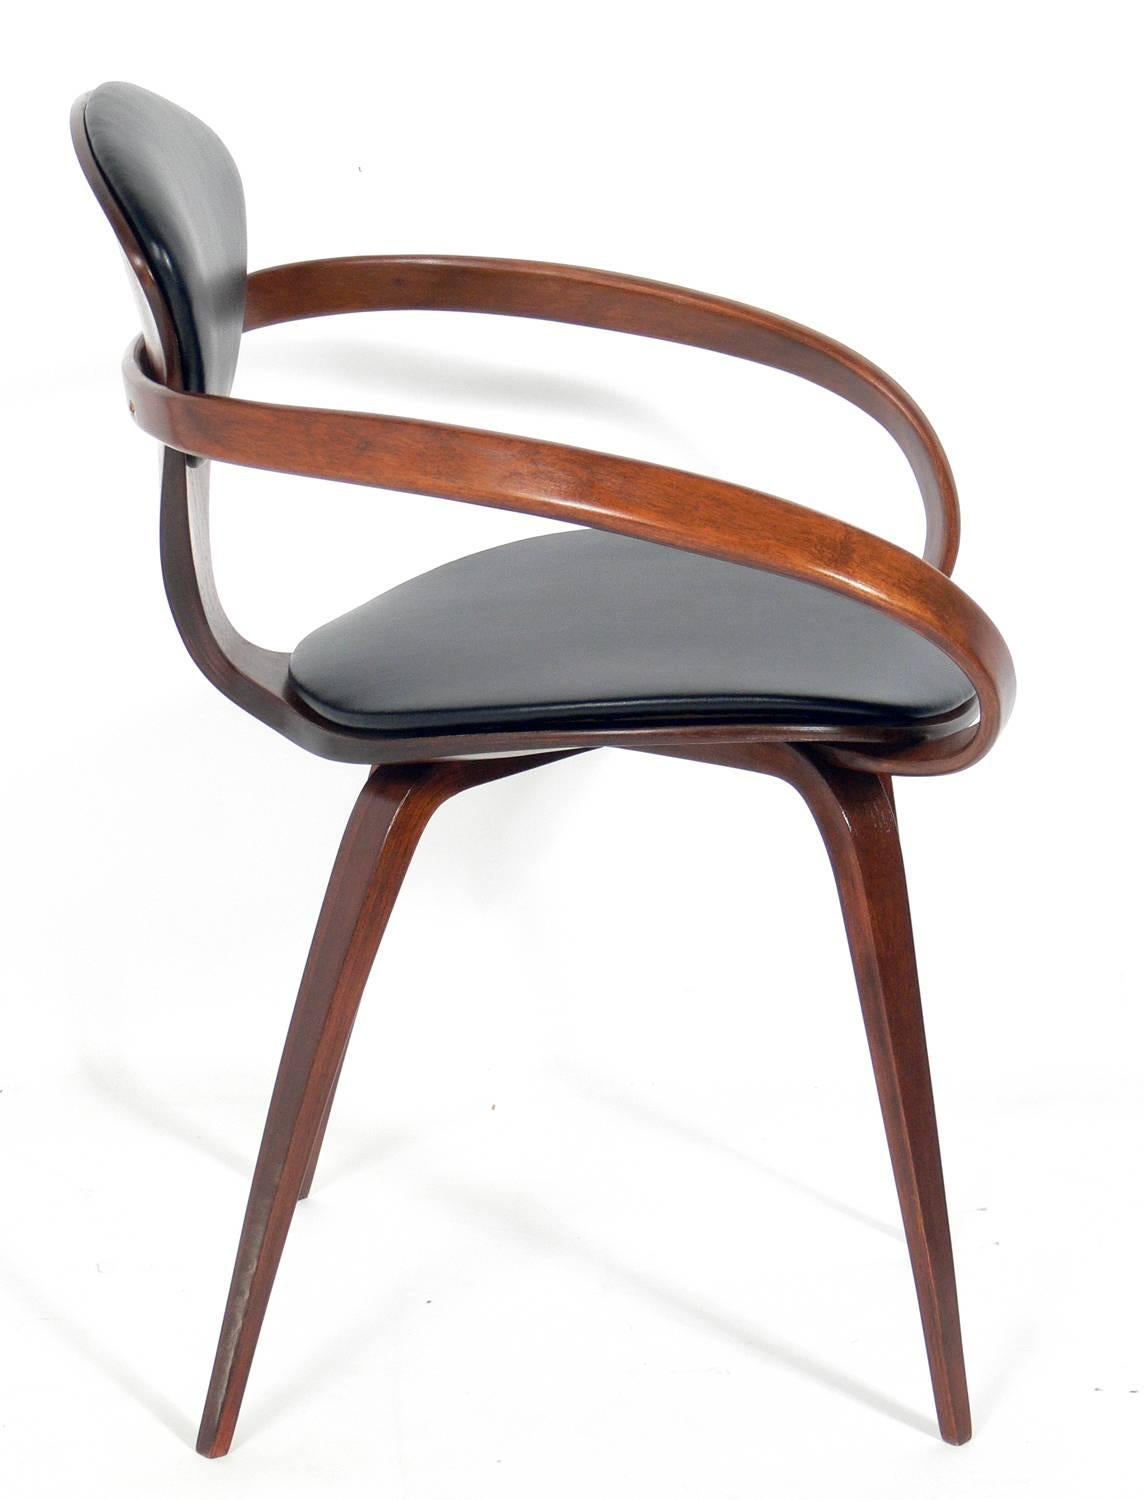 Set of 12 sculptural dining chairs, designed by Norman Cherner for Plycraft, American, circa 1950s. They have all been refinished and reupholstered in black vinyl. The side chairs measure 31